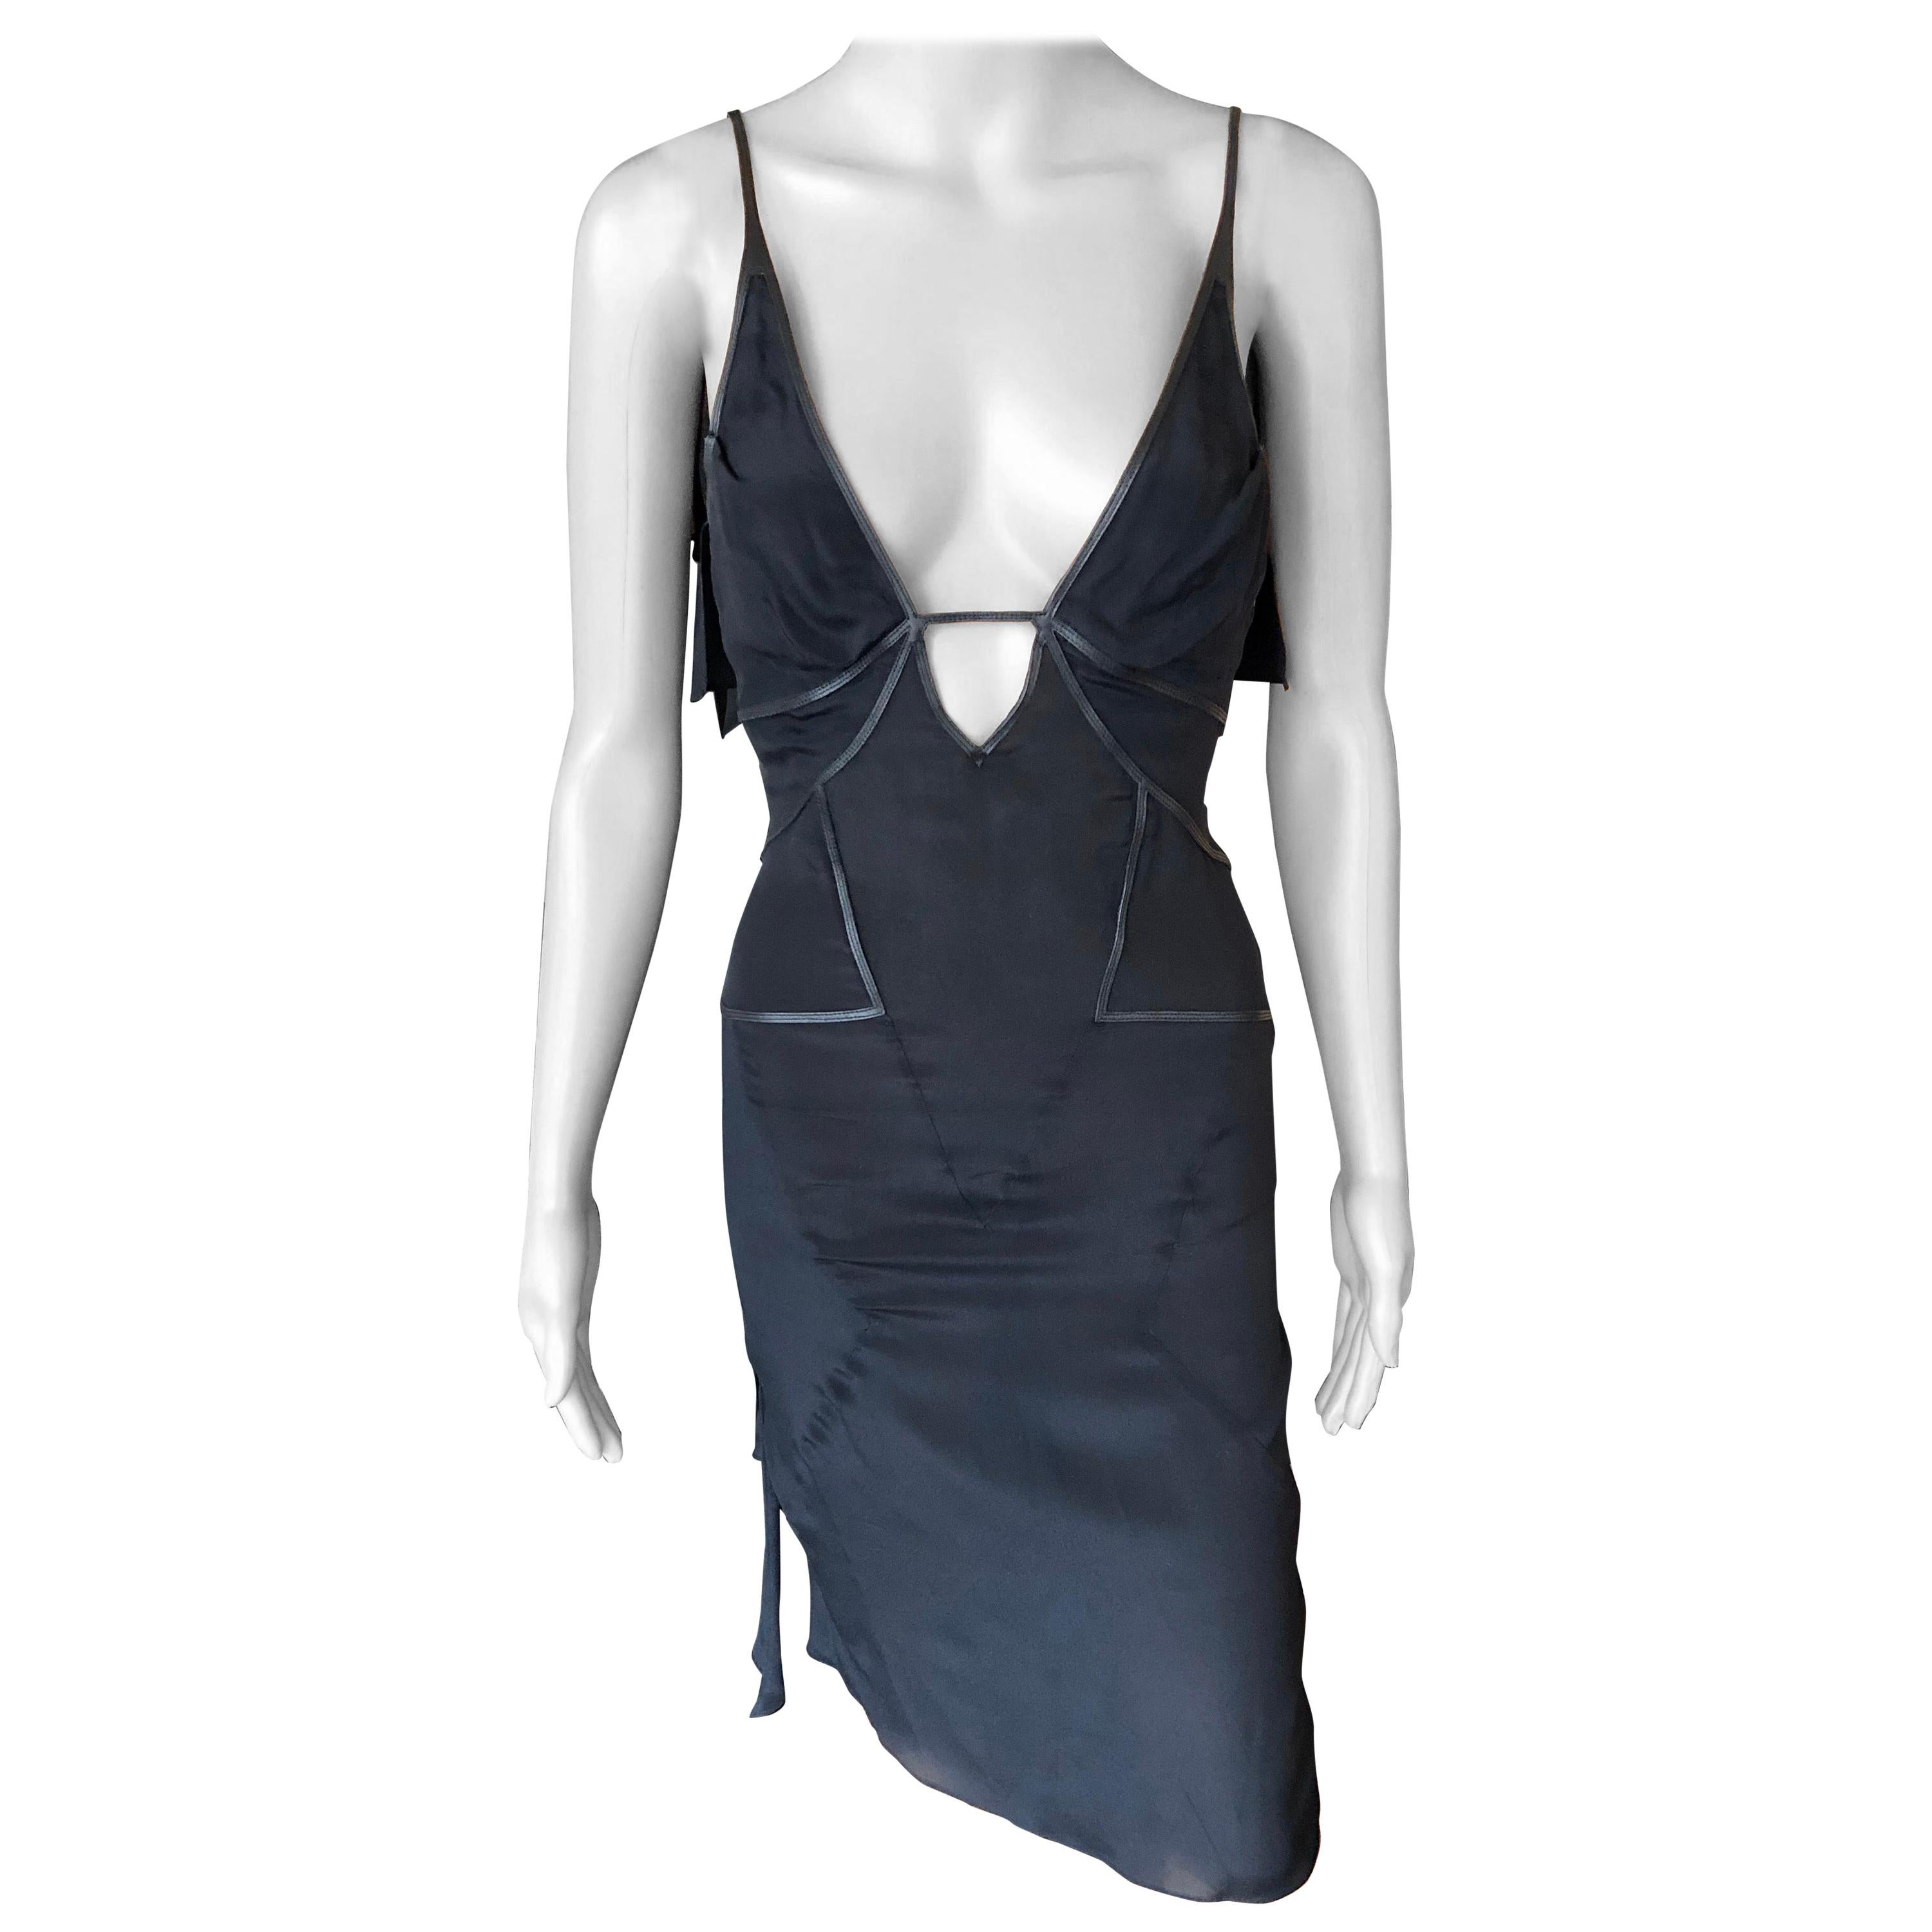 Gucci by Tom Ford S/S 2004 Cutout Plunged Neckline Black Dress For Sale